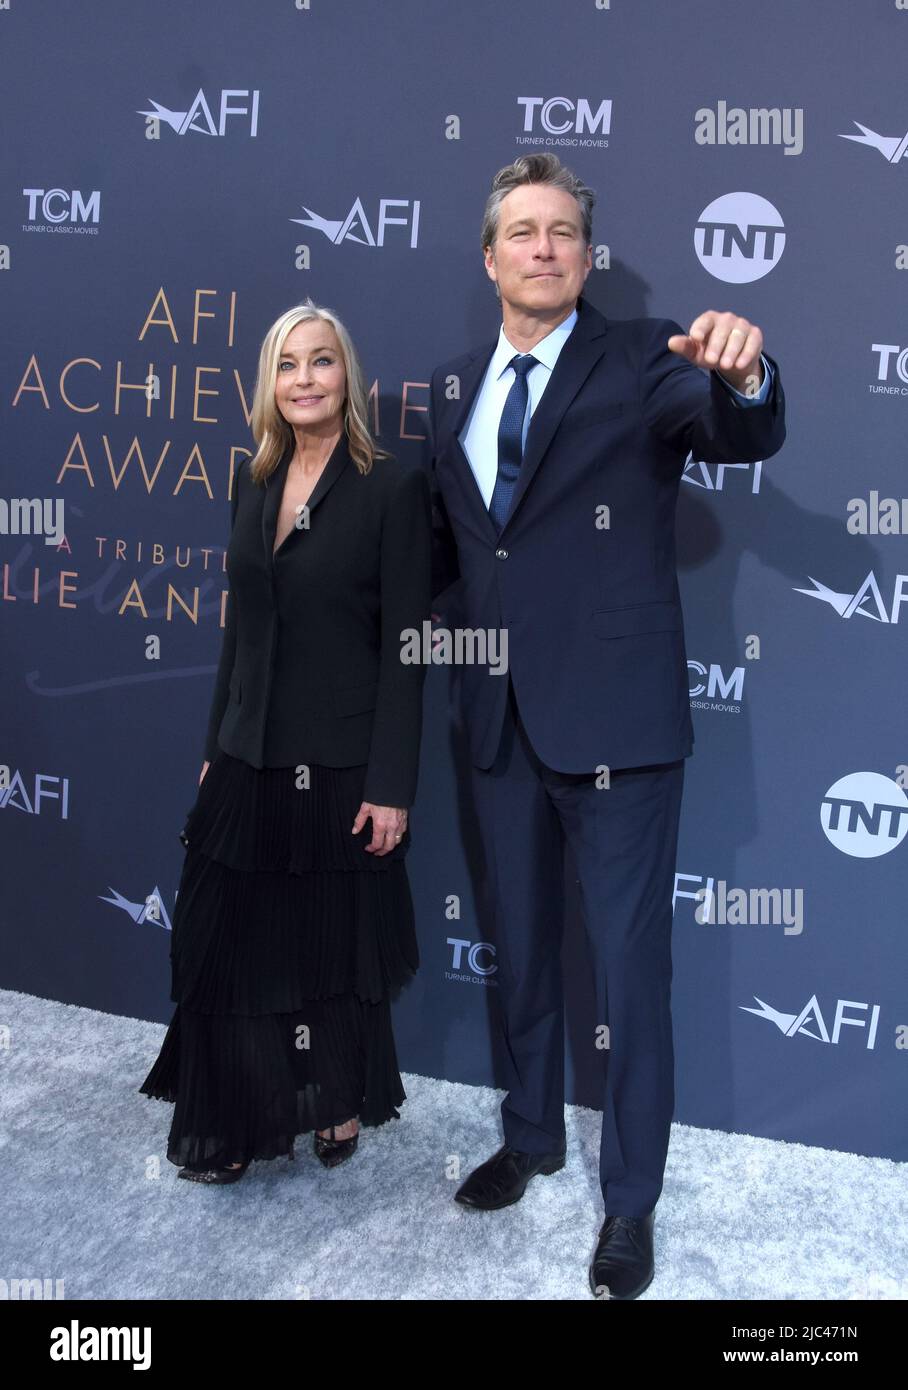 Hollywood, California, USA 9th June 2022 Actress Bo Derek and Actor John Corbett attend American Film Institute Life Achievement Award Tribute Gala to Julie Andrews at Dolby Theatre on June 9, 2022 in Hollywood, California, USA. Photo by Barry King/Alamy Live News Stock Photo